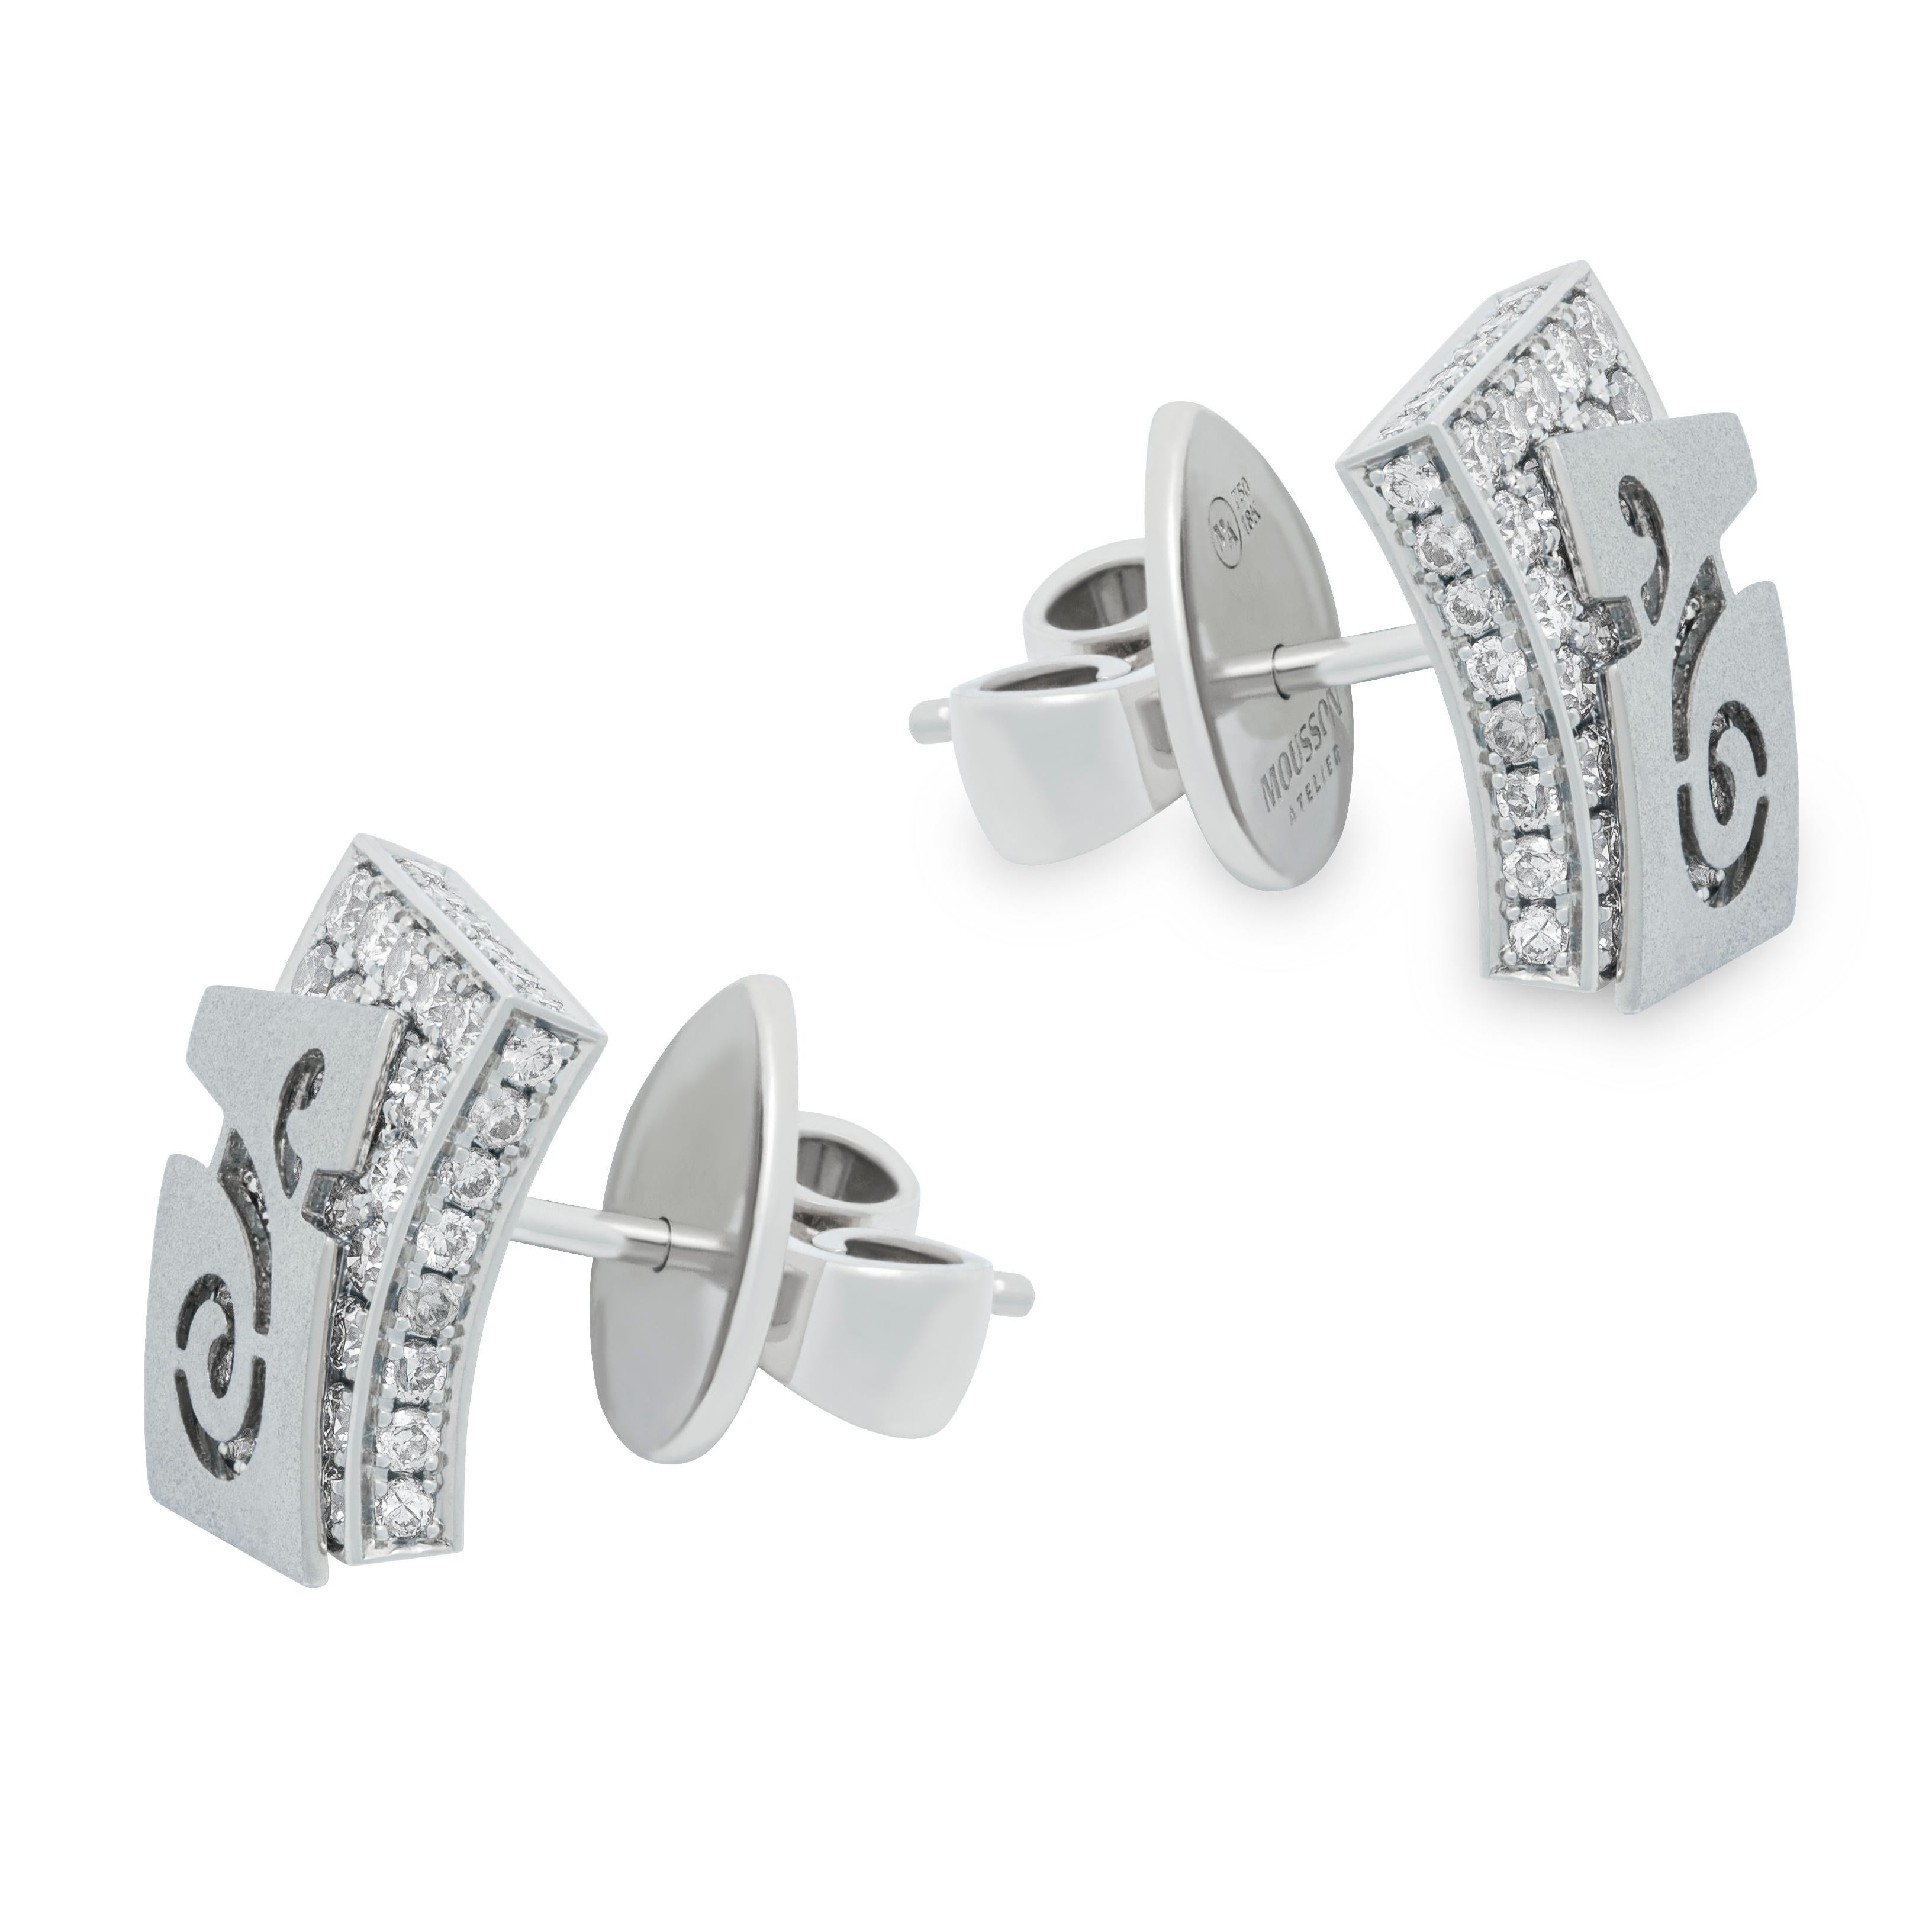 Diamonds 18 Karat White Gold Studs Veil Earrings

Veil inspired this jewelry series by our designers. For example, these Earrings seem to have two layers. The first layer is a 